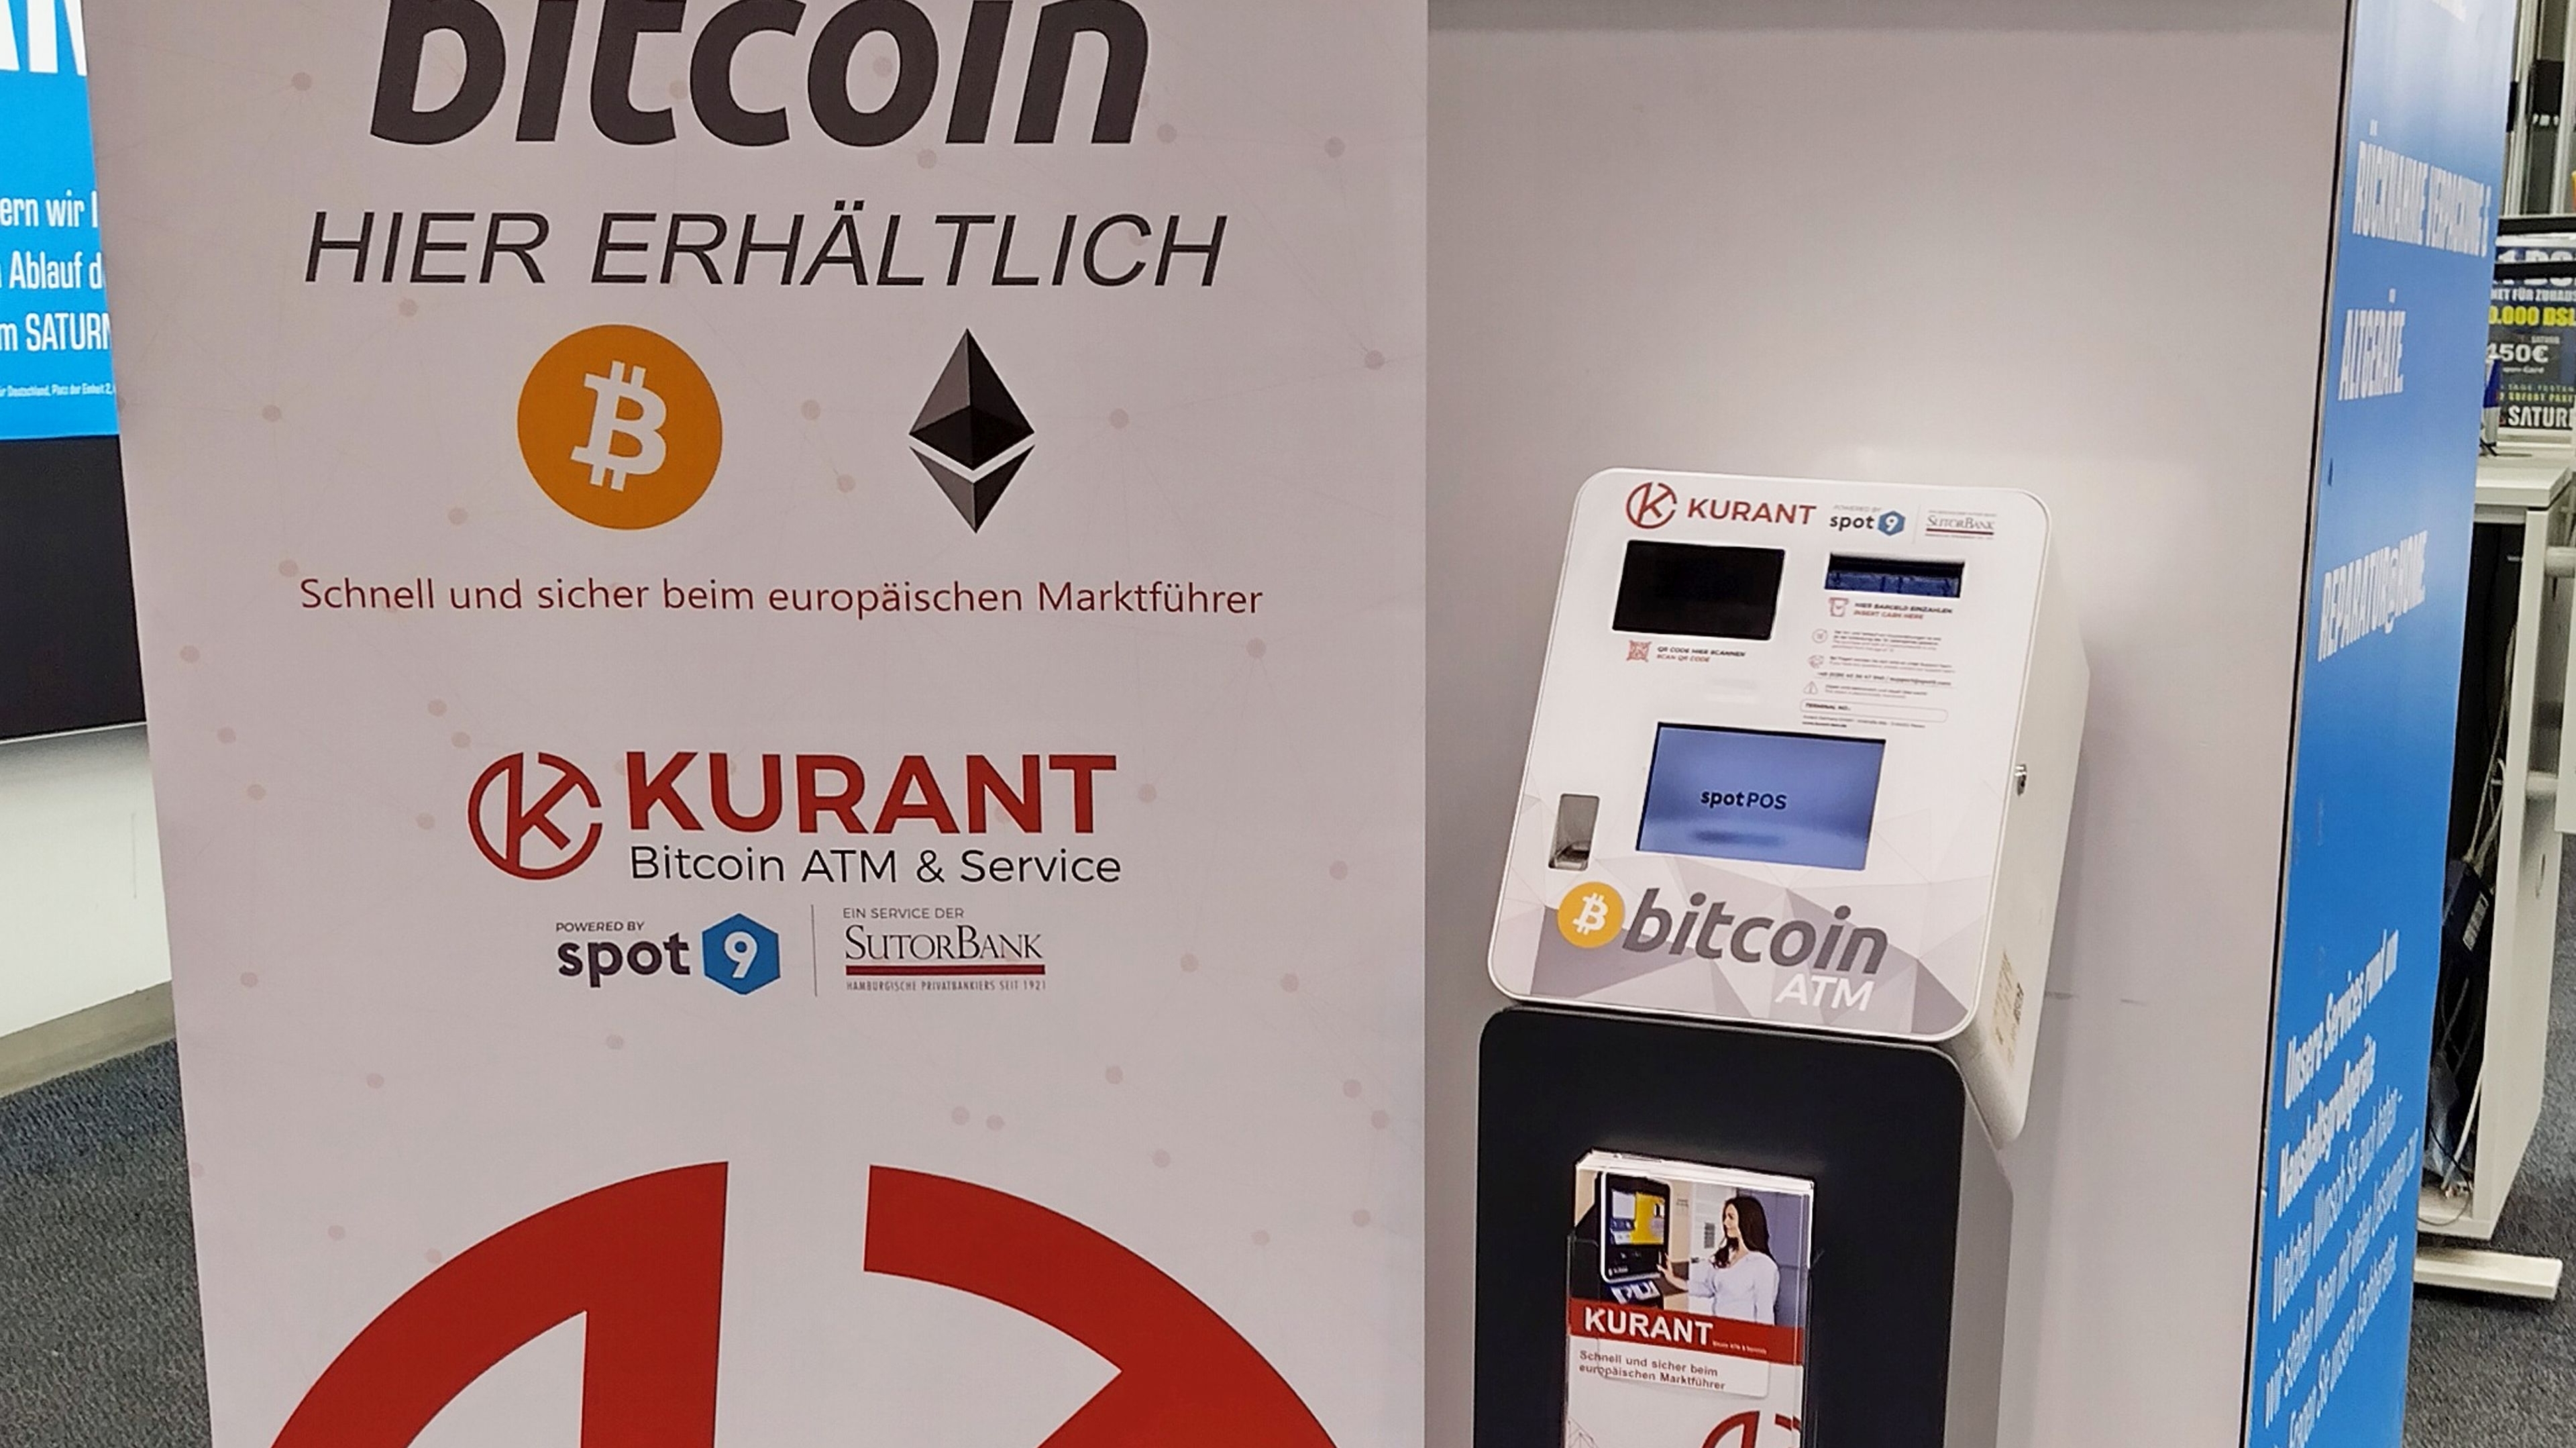 Largest German Electronics Store Saturn To Install Bitcoin ATM Machines